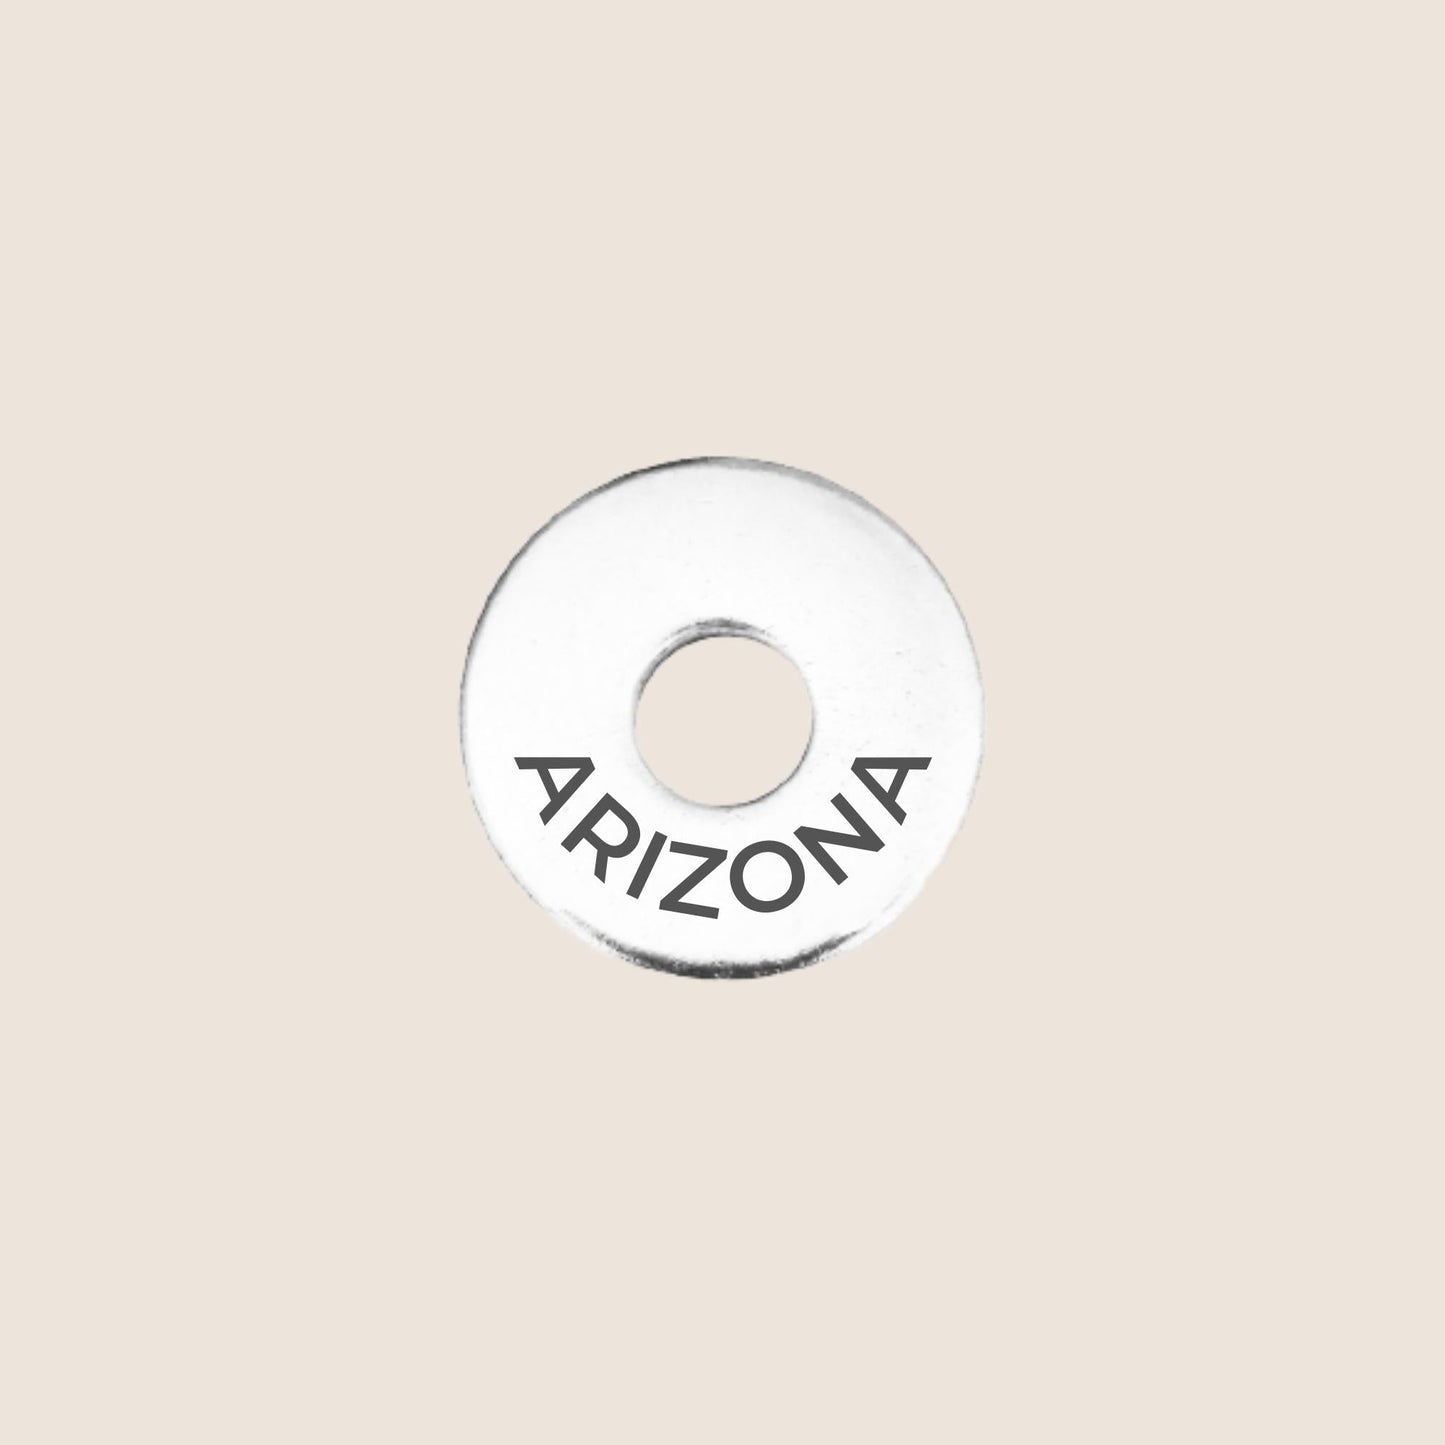 Engraved Arizona US State Token in stainless steel to add to your travel keepsake collection for your USA adventures.